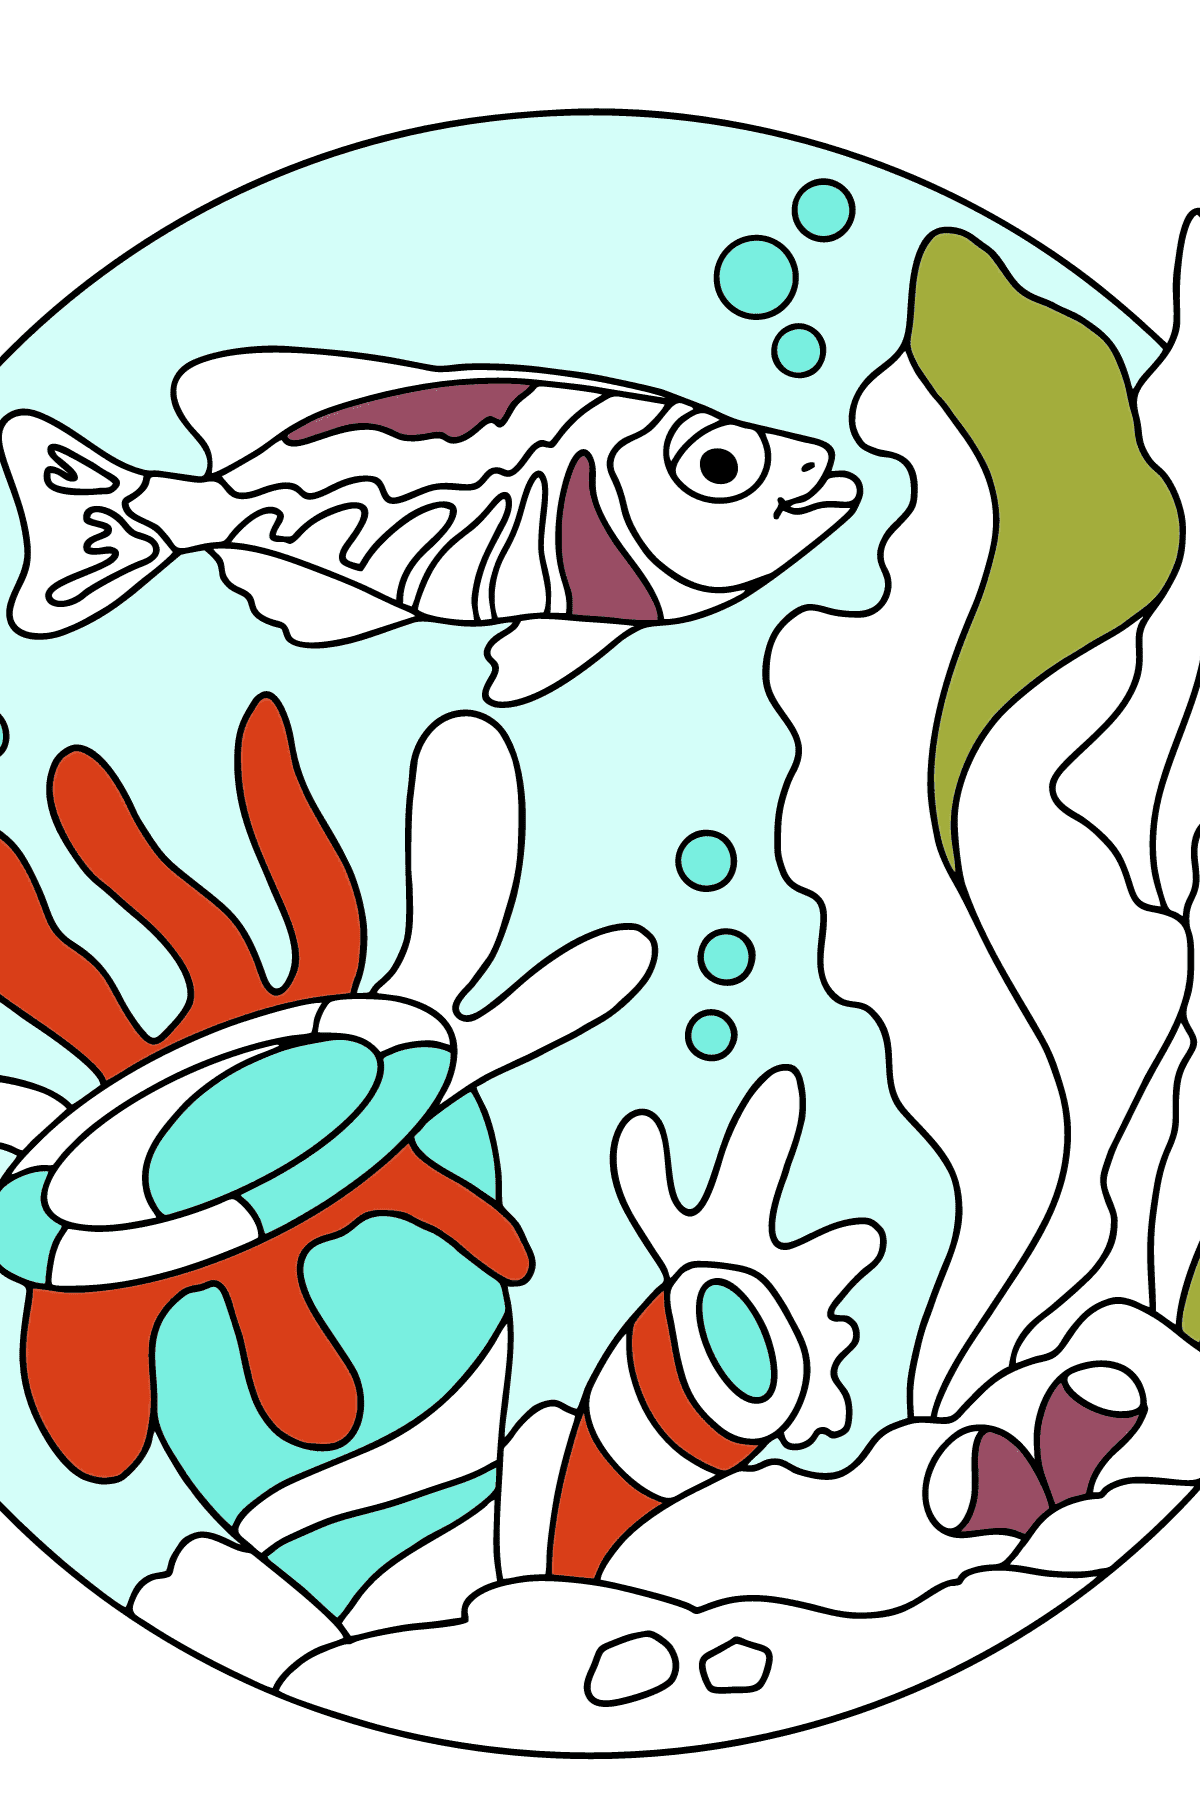 Coloring Page - A Fish is Admiring the Corals - Coloring Pages for Children